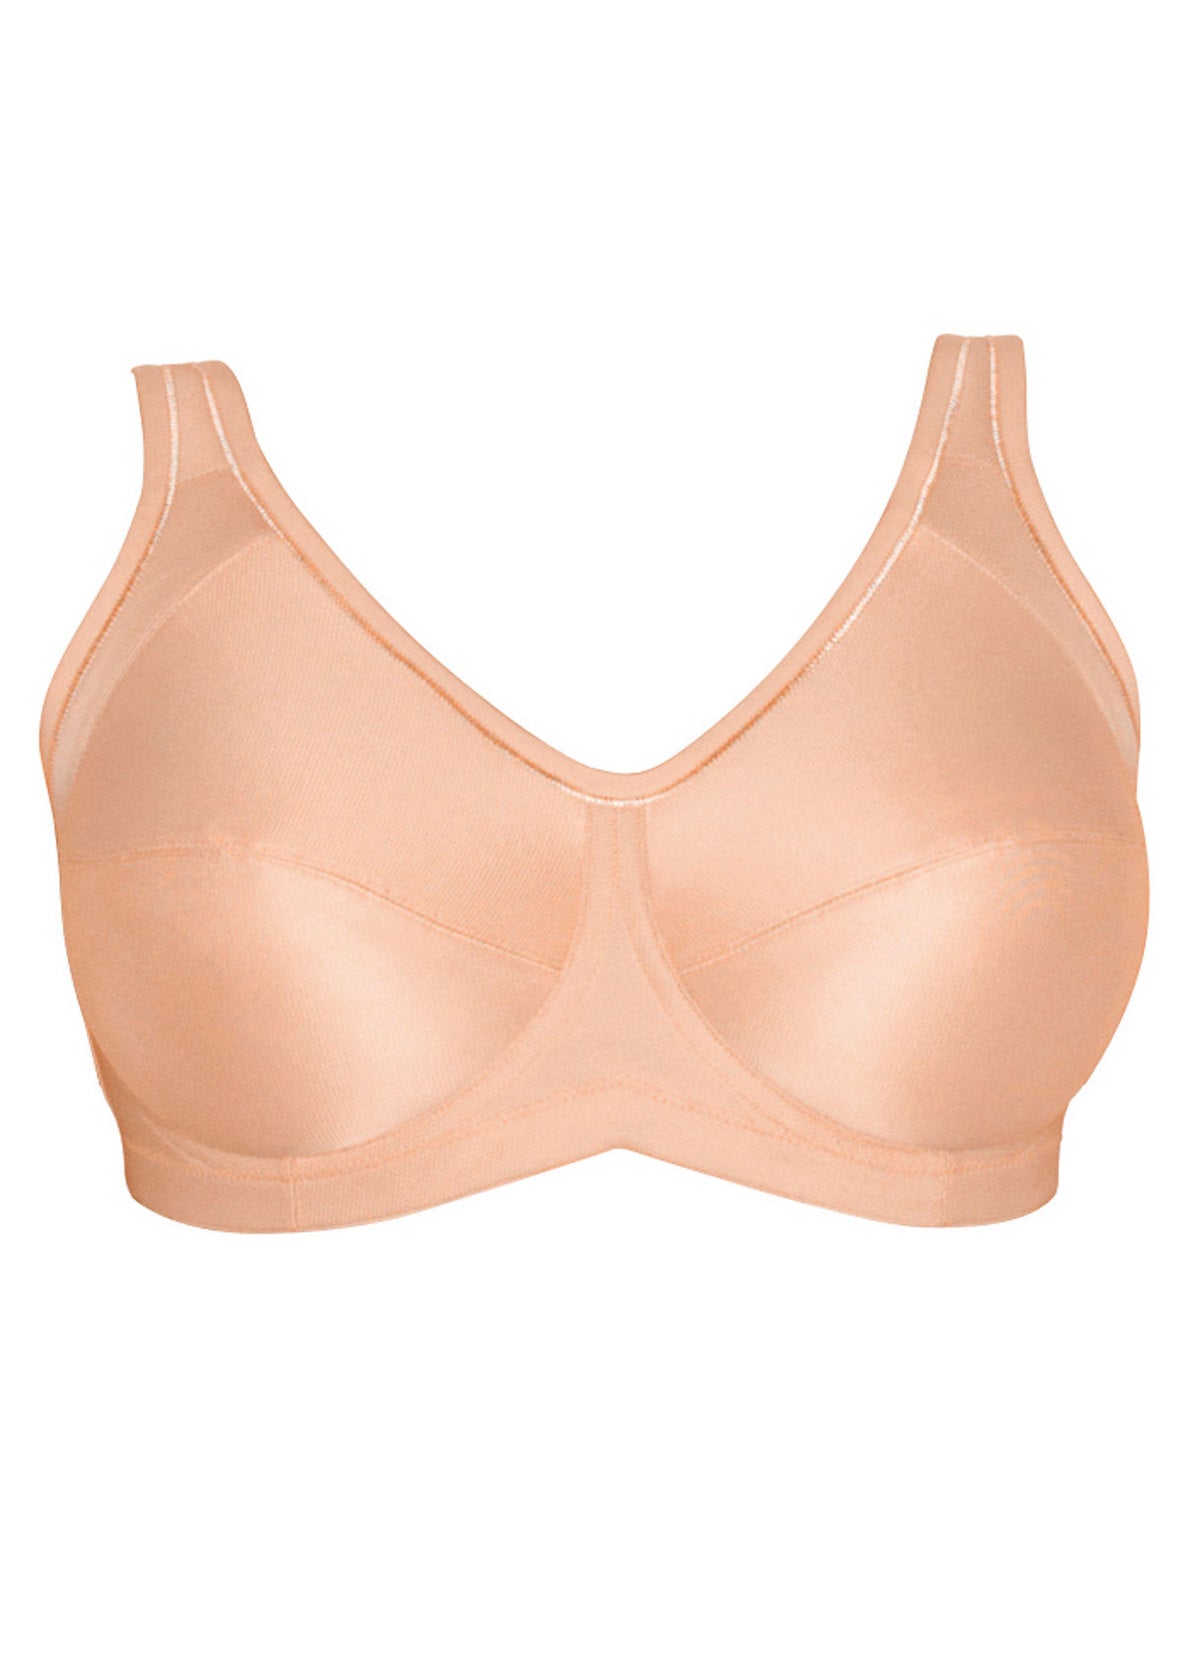 Sy-A7645 Sports Wear Nude Feeling Gym Fitness Bra Double Layer and